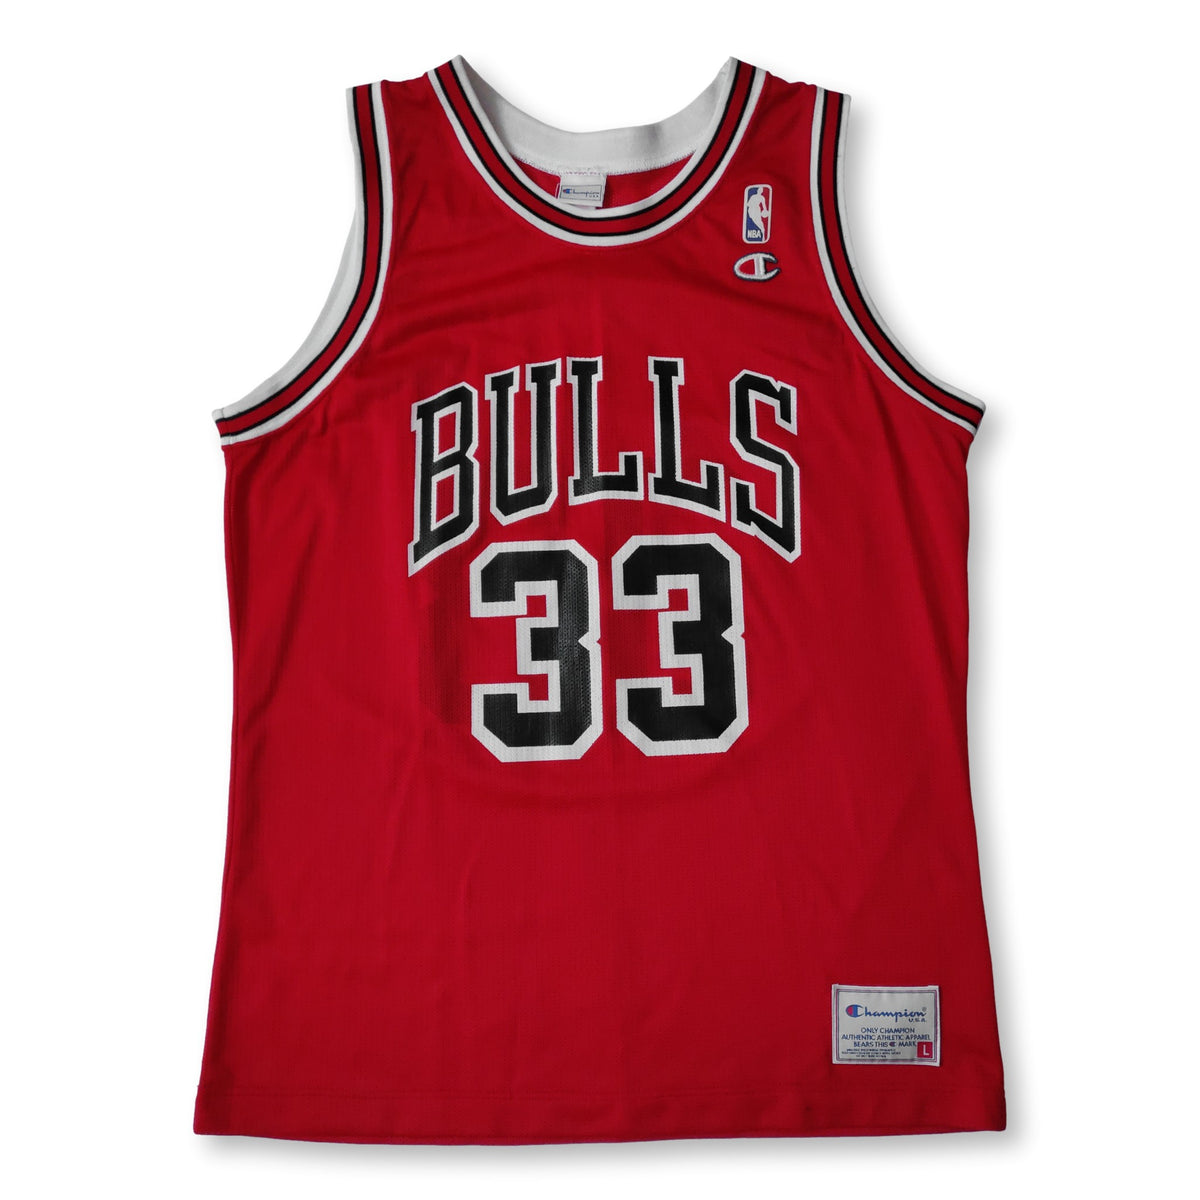 Champion  Chicago Bulls - Scottie Pippen #33 Jersey Black Youth L 14-16  USED